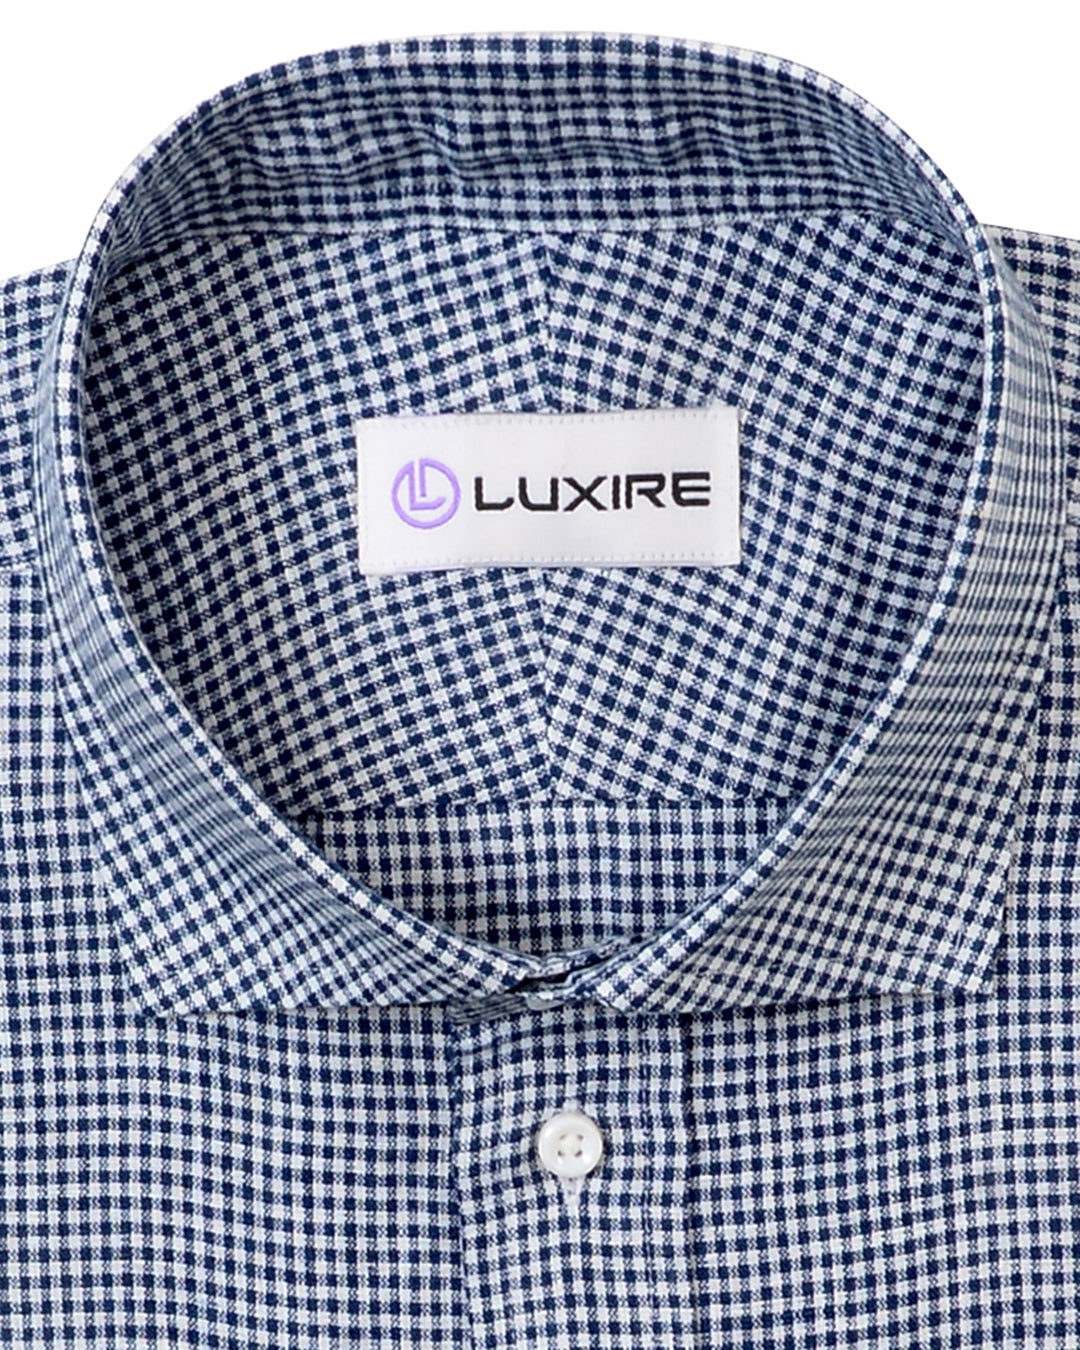 Collar of the custom linen shirt for men in blue and white gingham by Luxire Clothing